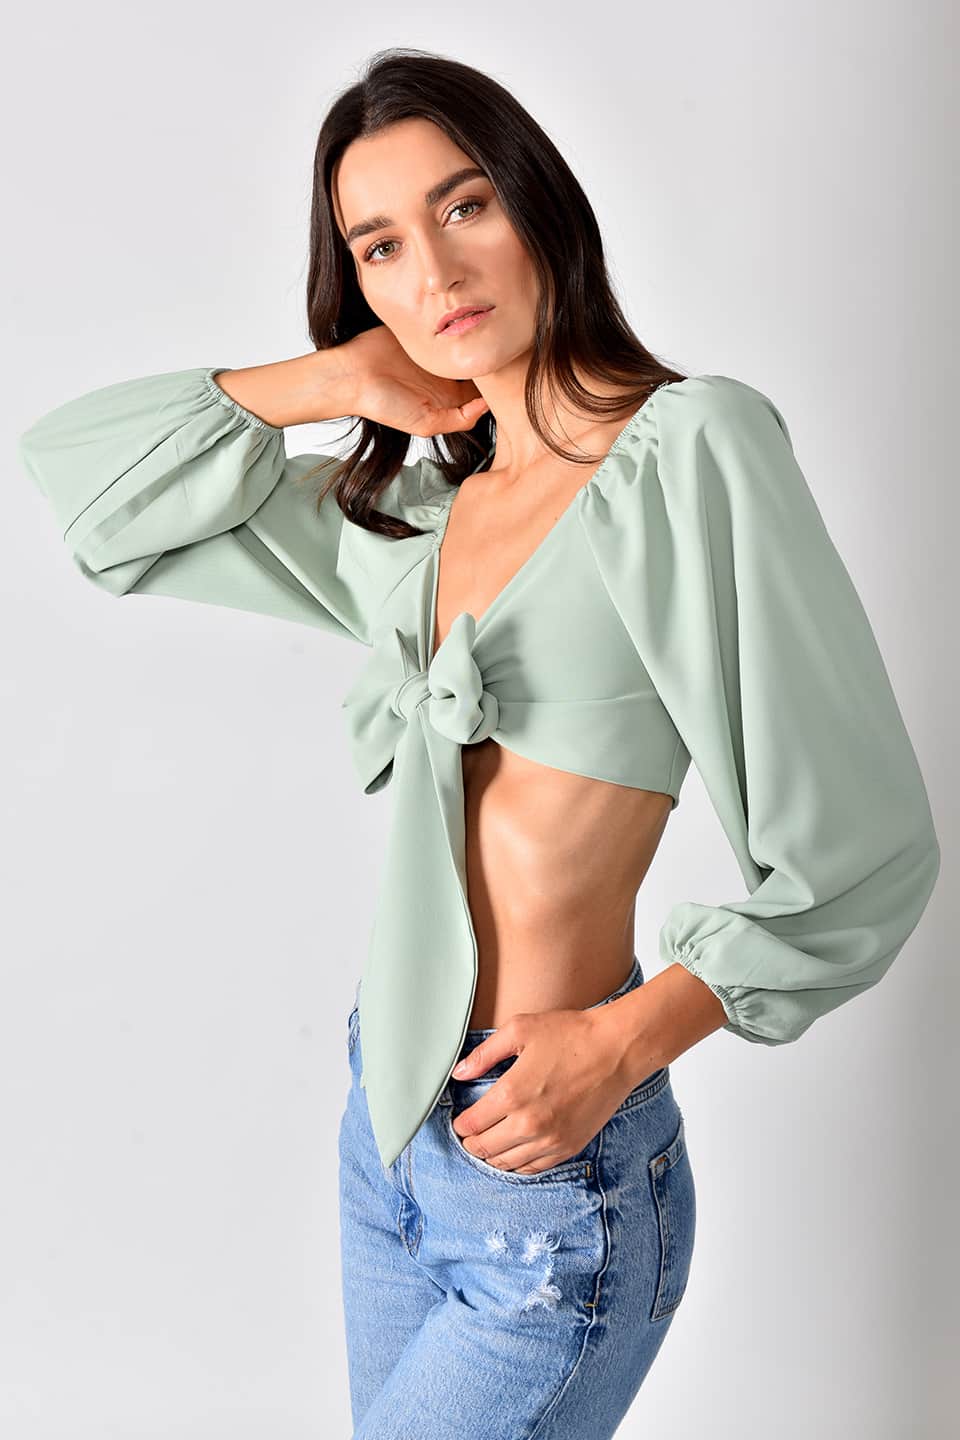 Model in pose from a side while wearing trendy crop top in green color